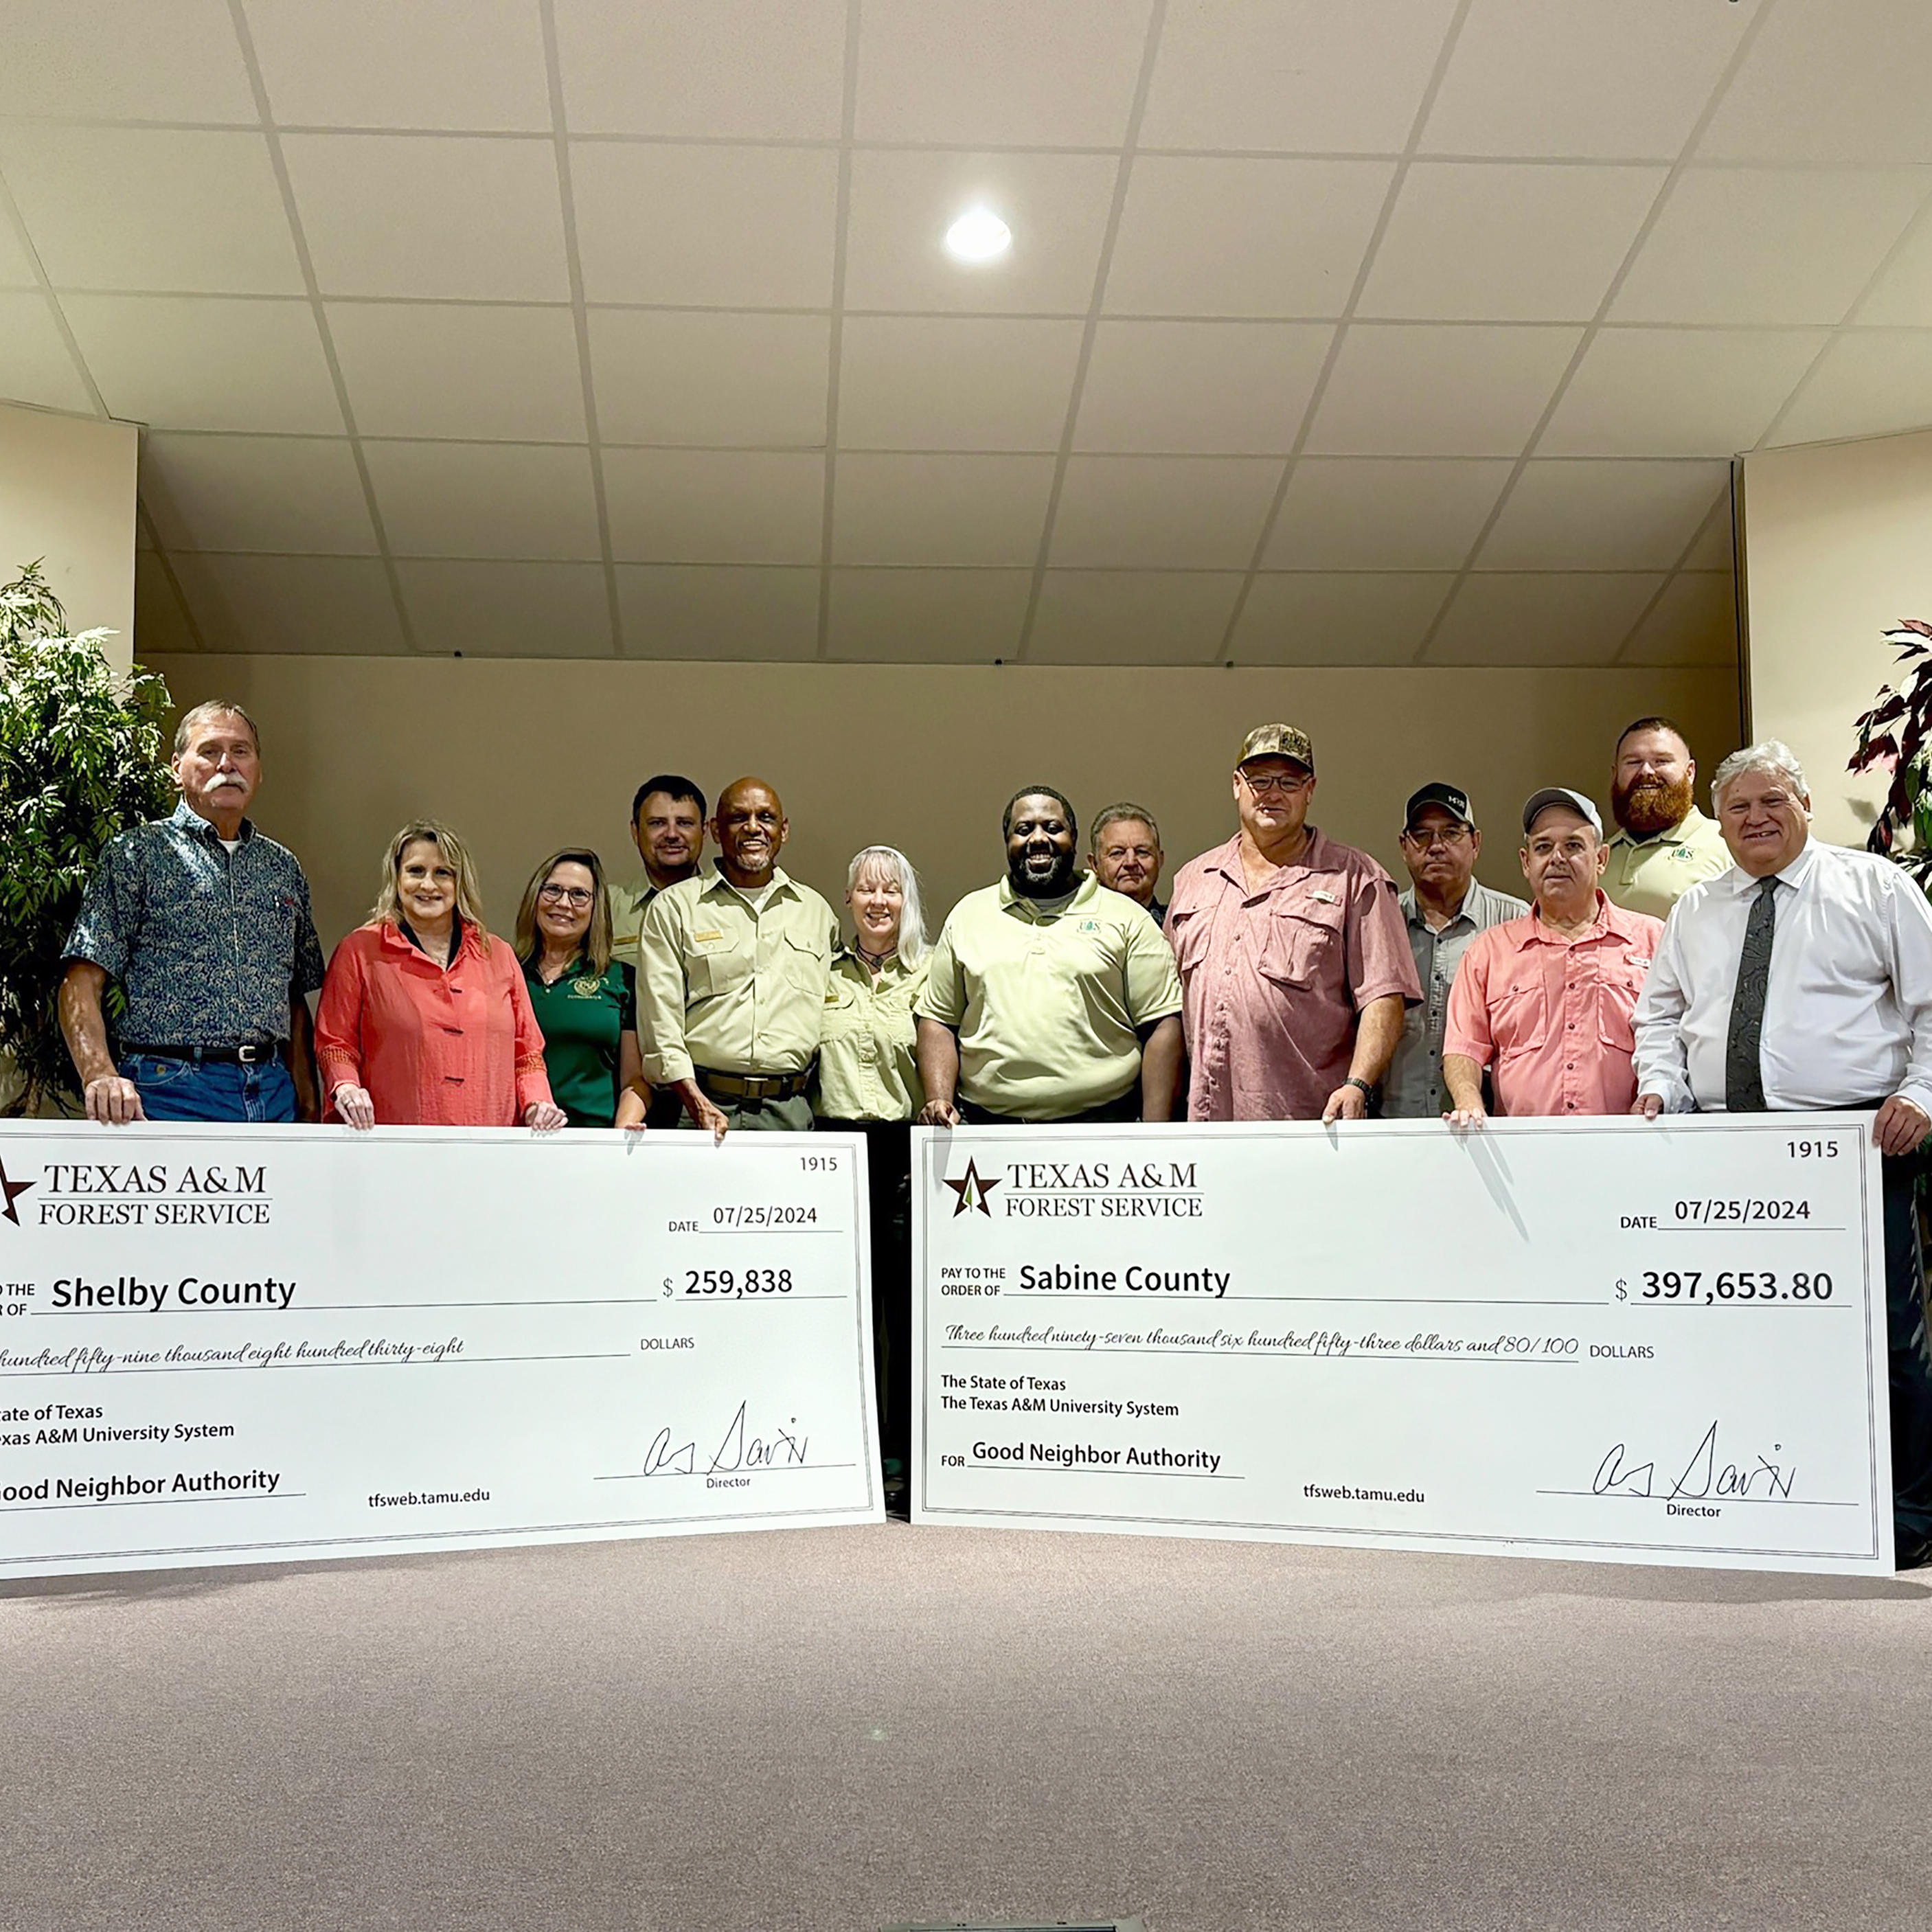 Sabine and Shelby counties received $657,492 for county road improvement projects from timber sale profits through the Good Neighbor Authority partnership between USDA Forest Service and Texas A&amp;M Forest Service.